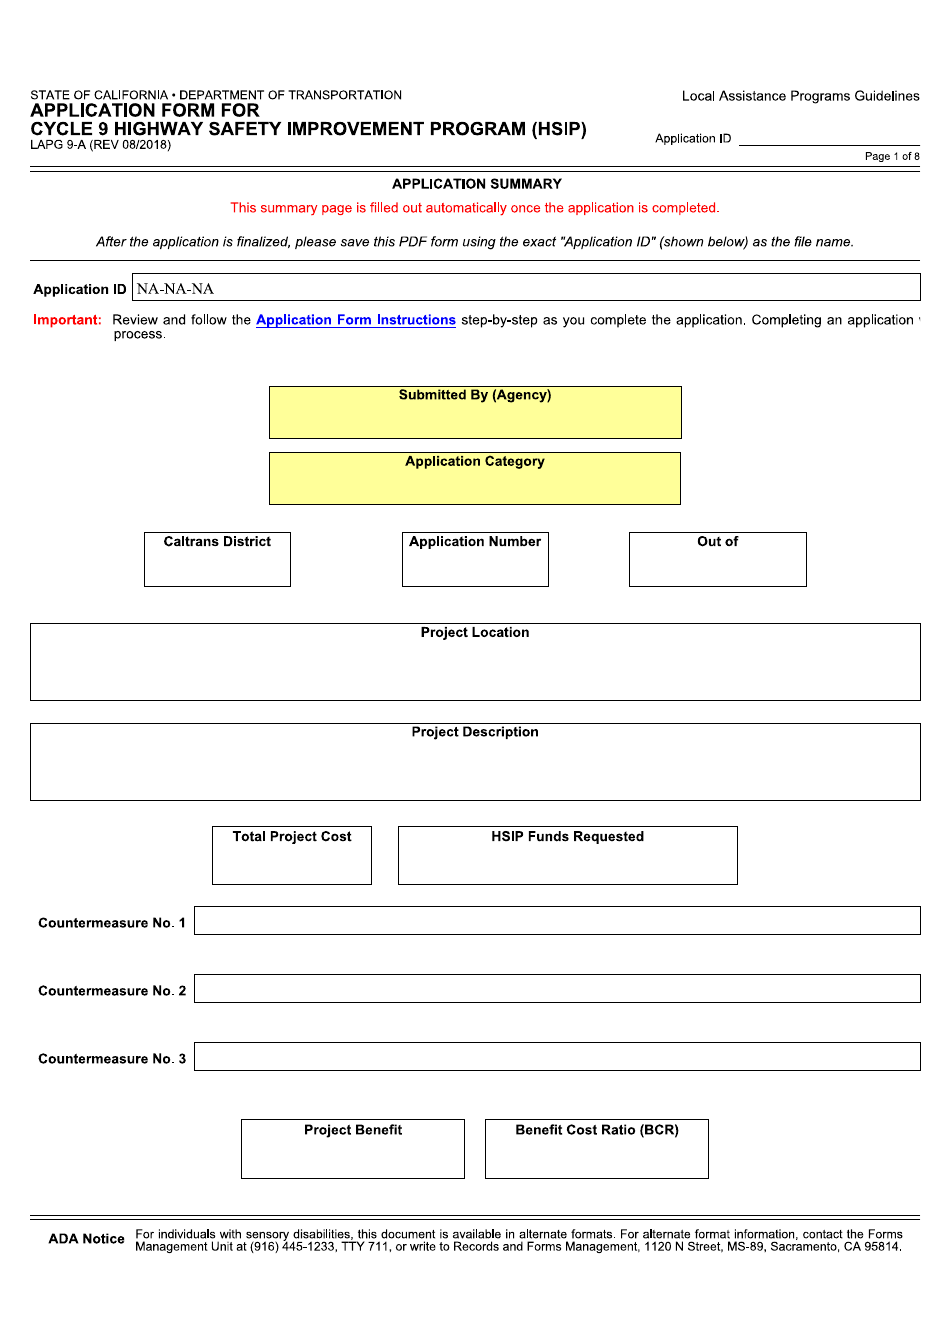 Form LAPG9-A Application Form for Cycle 9 Highway Safety Improvement Program (Hsip) - California, Page 1